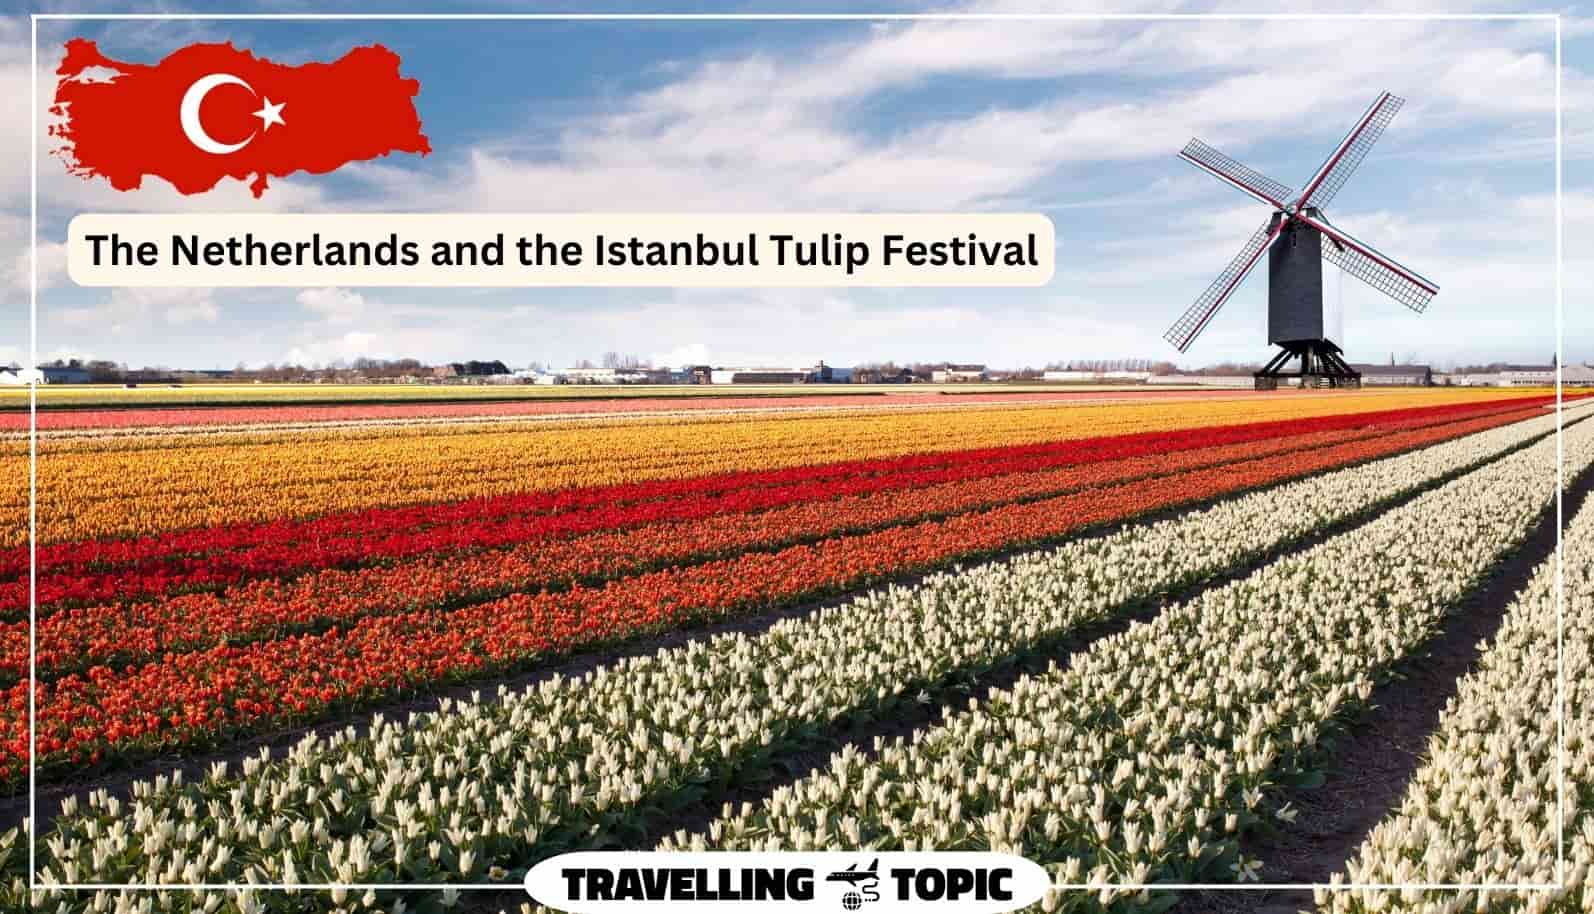 The Netherlands and the Istanbul Tulip Festival